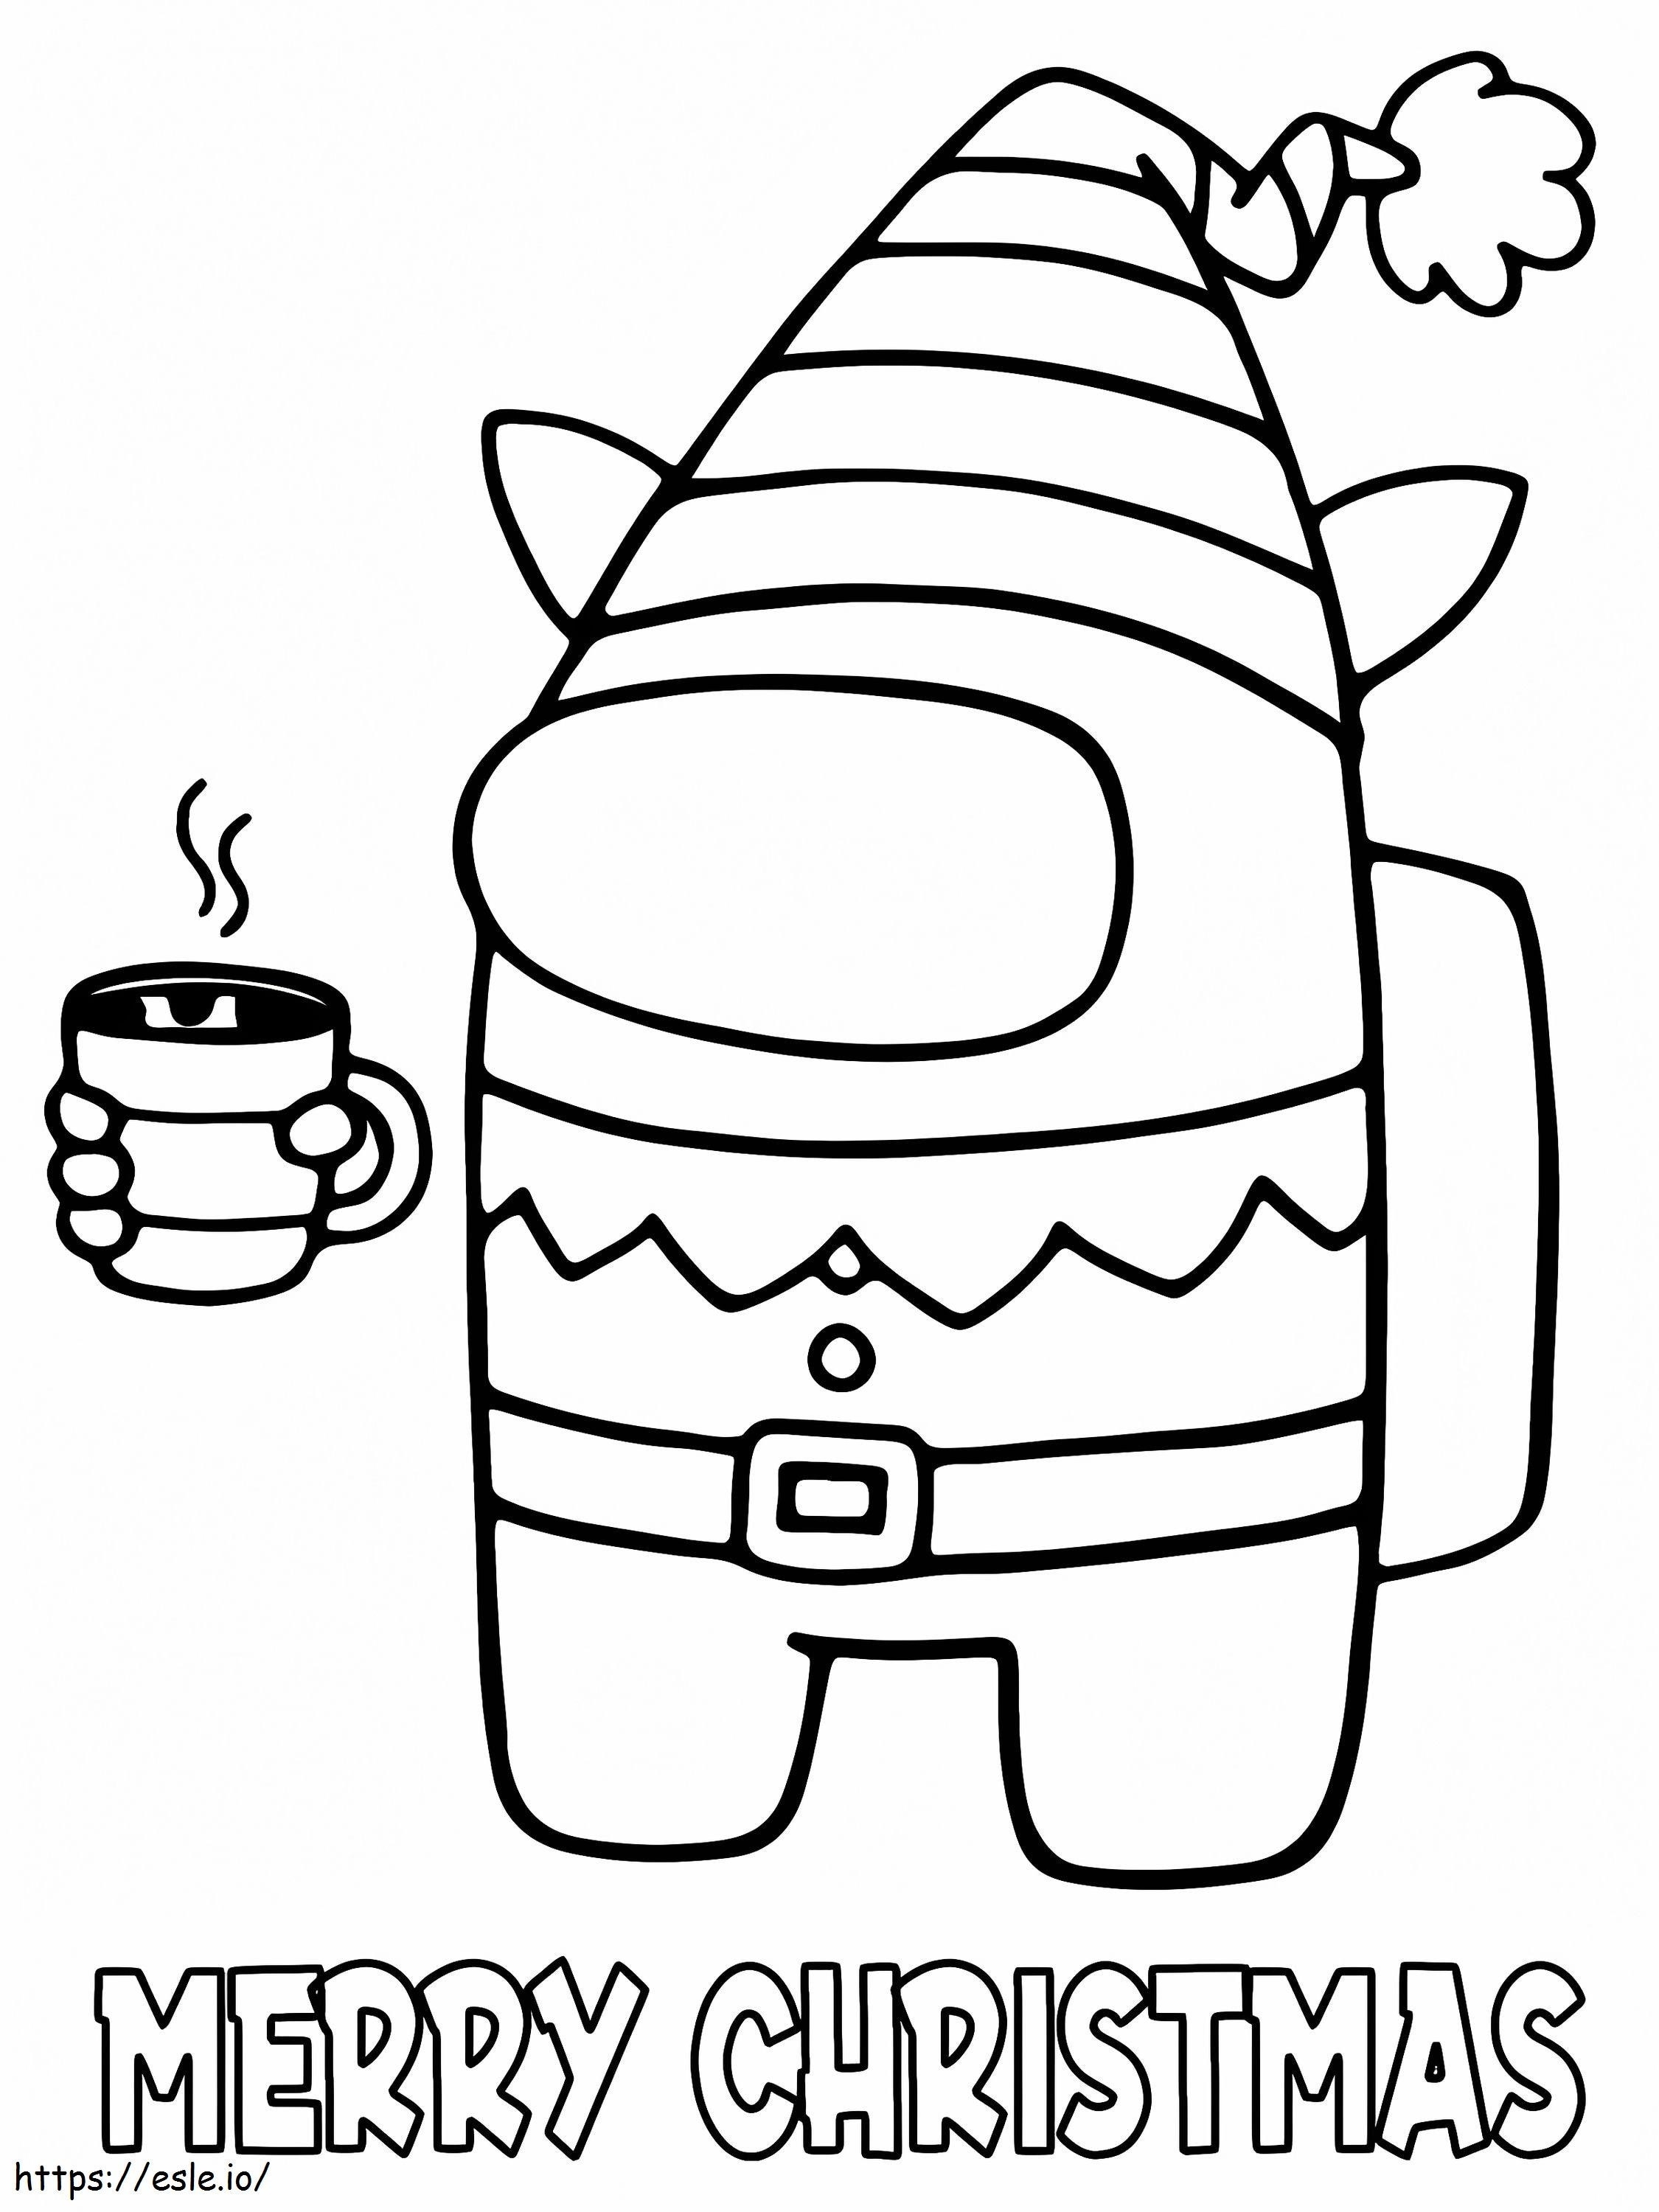 Among Us Merry Christmas Coloring 9 coloring page